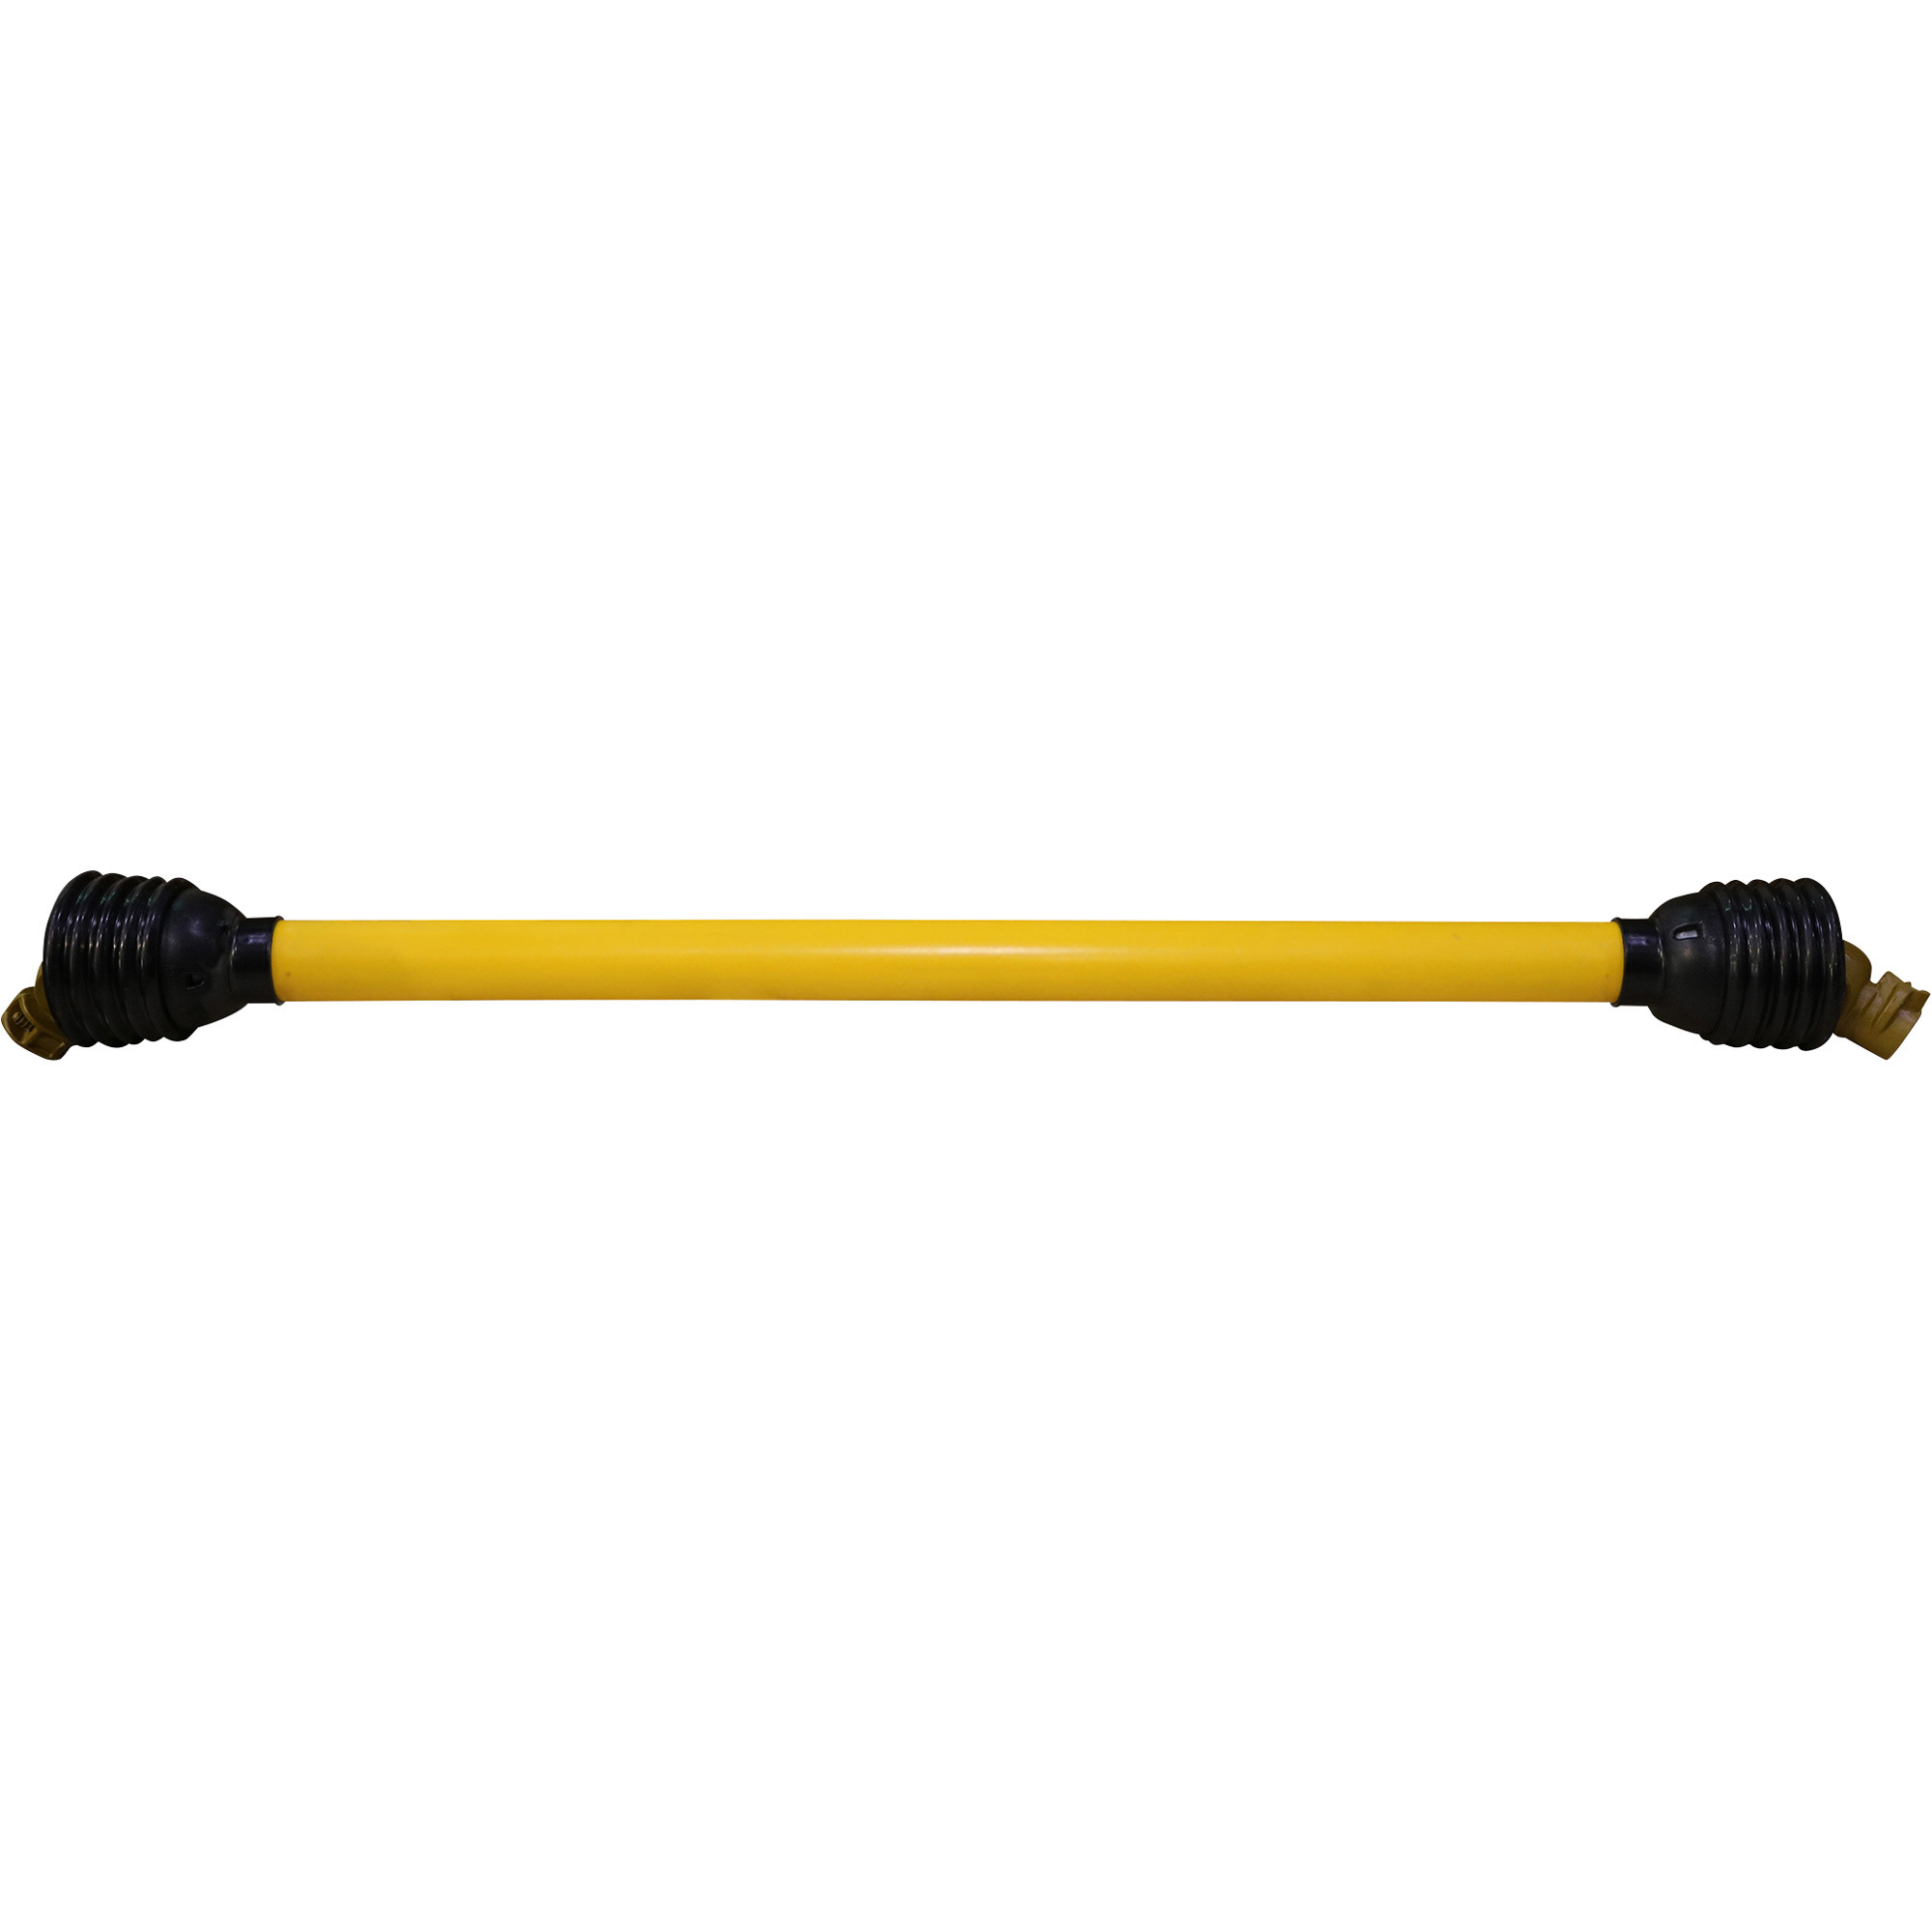 Braber Equipment General-Purpose PTO Shaft Assembly, 64Inch Collapsed Length, Model 69.885.664